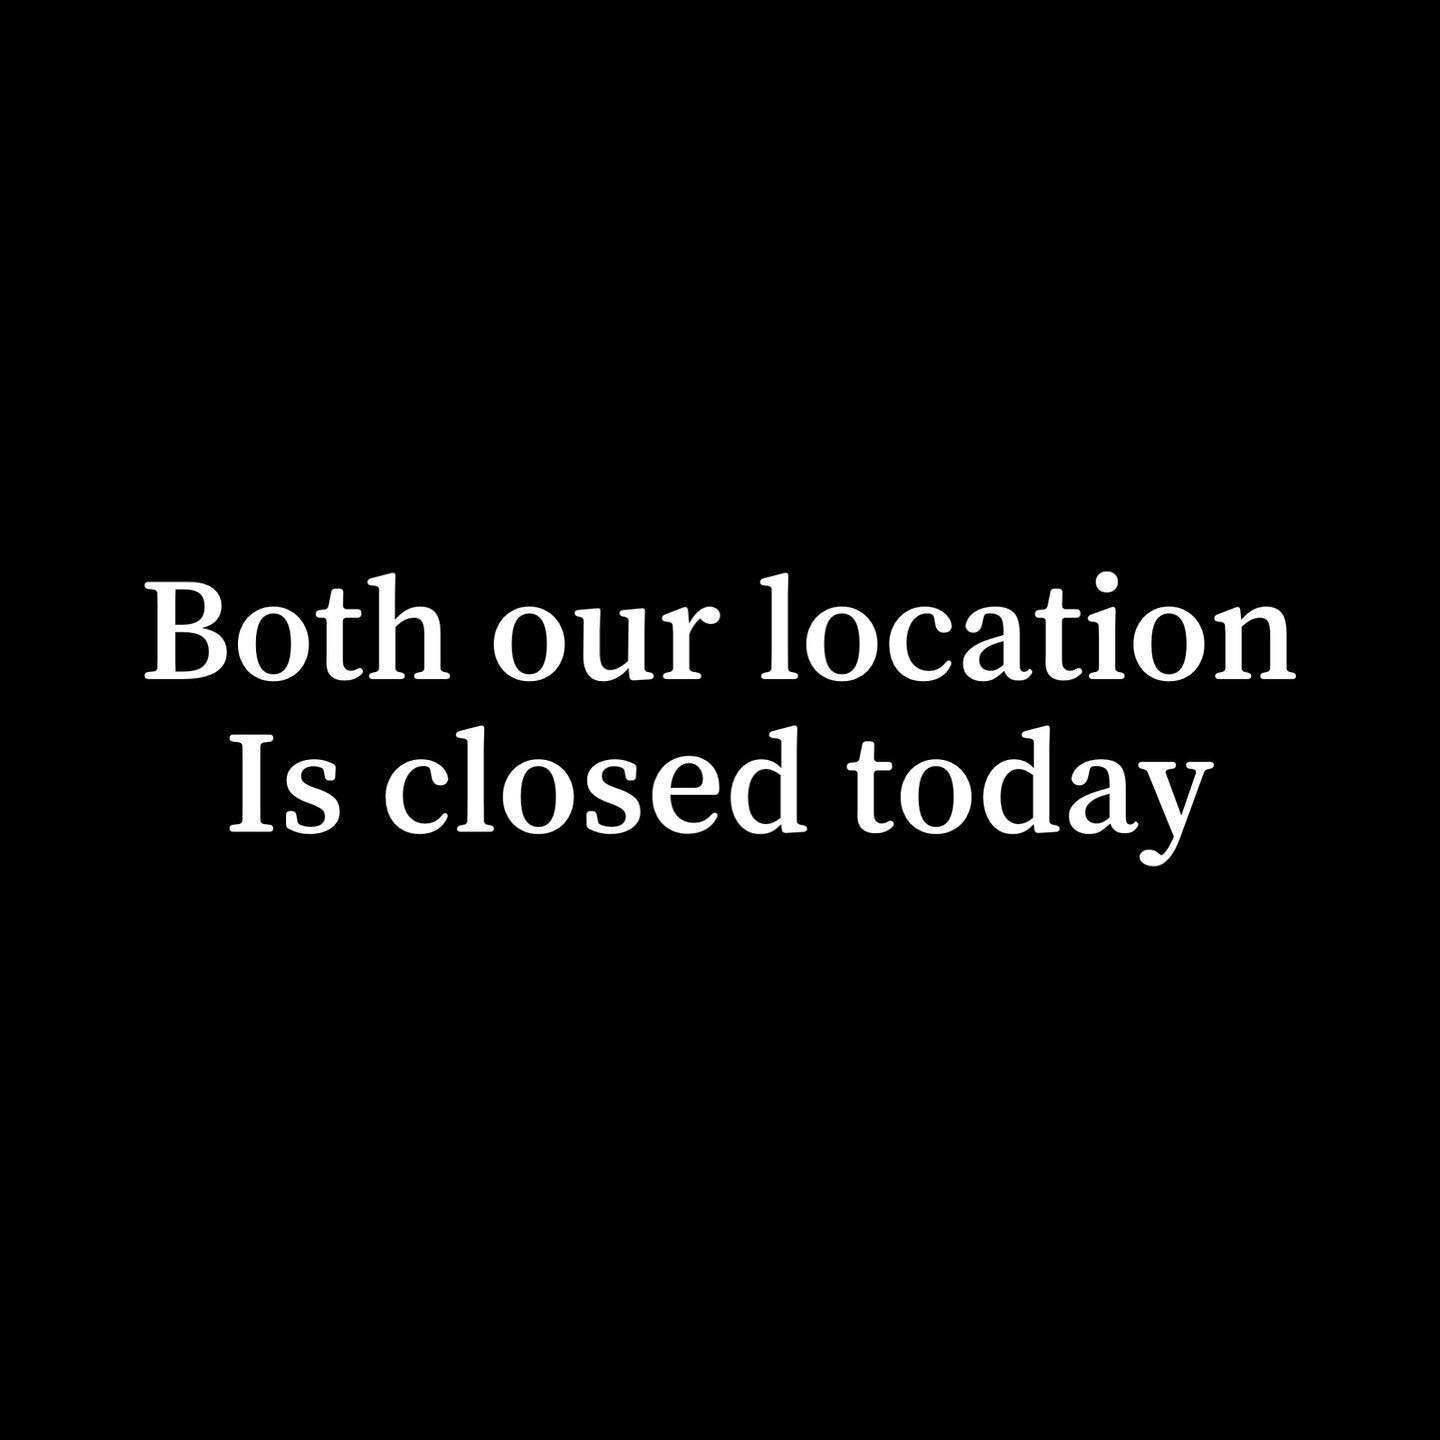 Some of our workers were having headaches and coughing a lot (not covid) due to bad air quality in Seattle. So we decided to close down today. Sorry for the inconvenience. And stay safe.